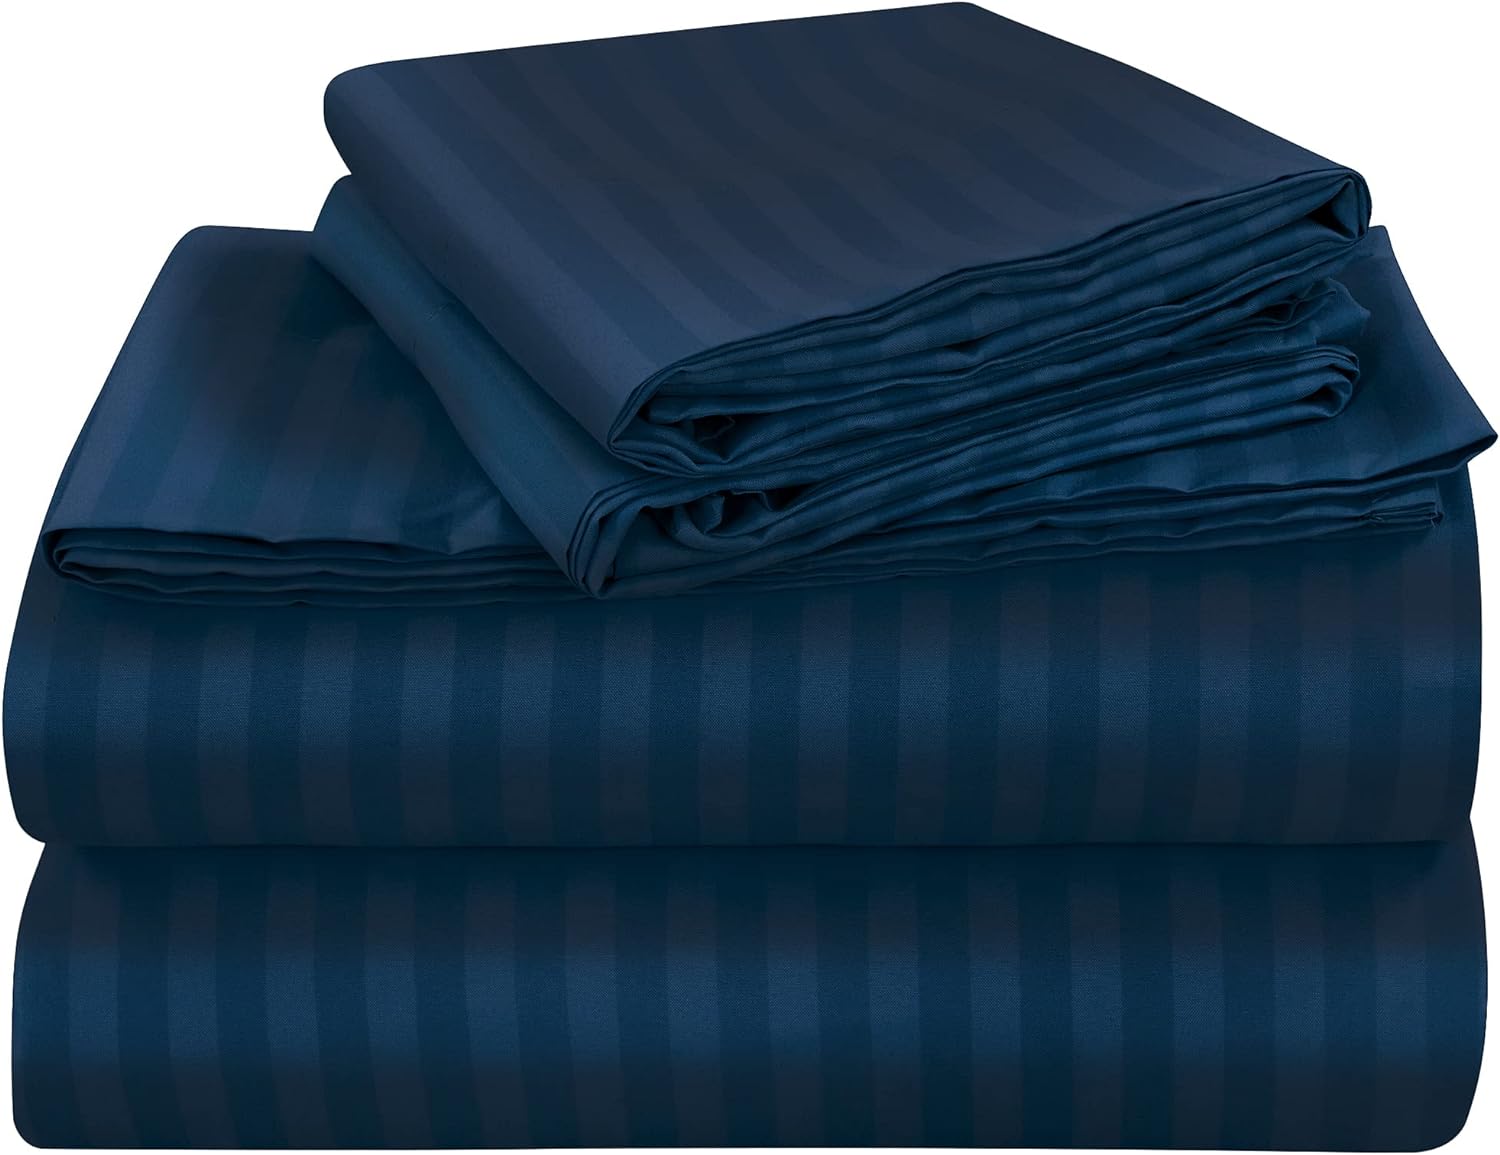 Royale Linen Striped Bed Sheet Set - Brushed Microfiber 1800 Bedding - 1 Fitted Sheet, 1 Flat Sheet, 2 Pillow Cases - Wrinkle & Fade Resistant - 4 Piece Damask Stripe Queen Bed Sheet Set (Queen, Navy)